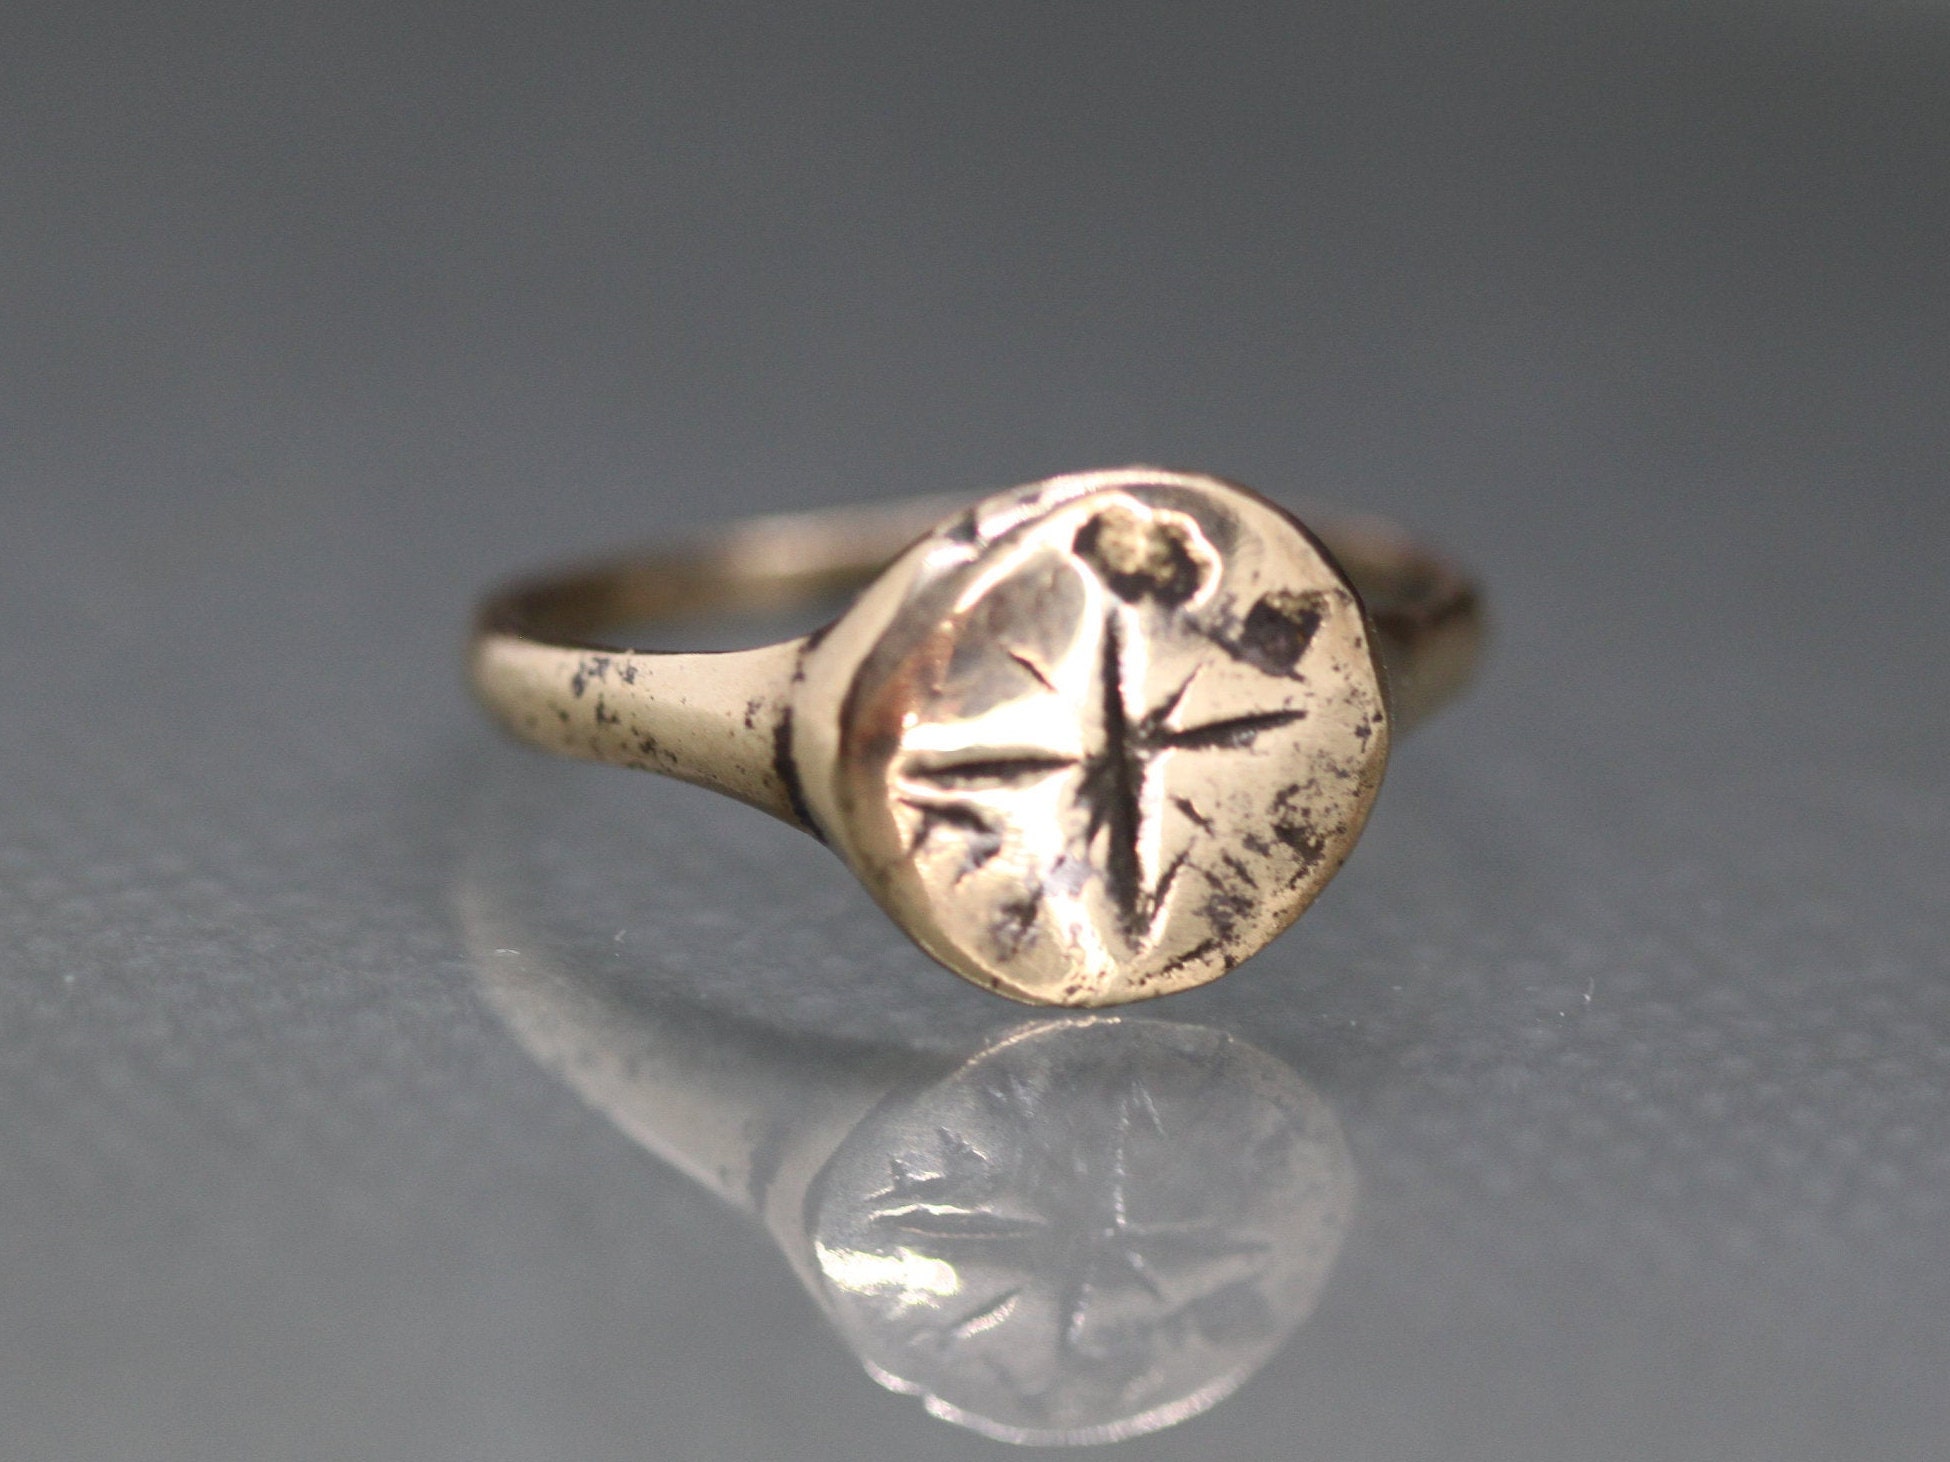 Ancient artifact Medieval jewelry Crusaders artifact Certificate upon request Ancient Medieval Crusaders Ring Ancient jewelry